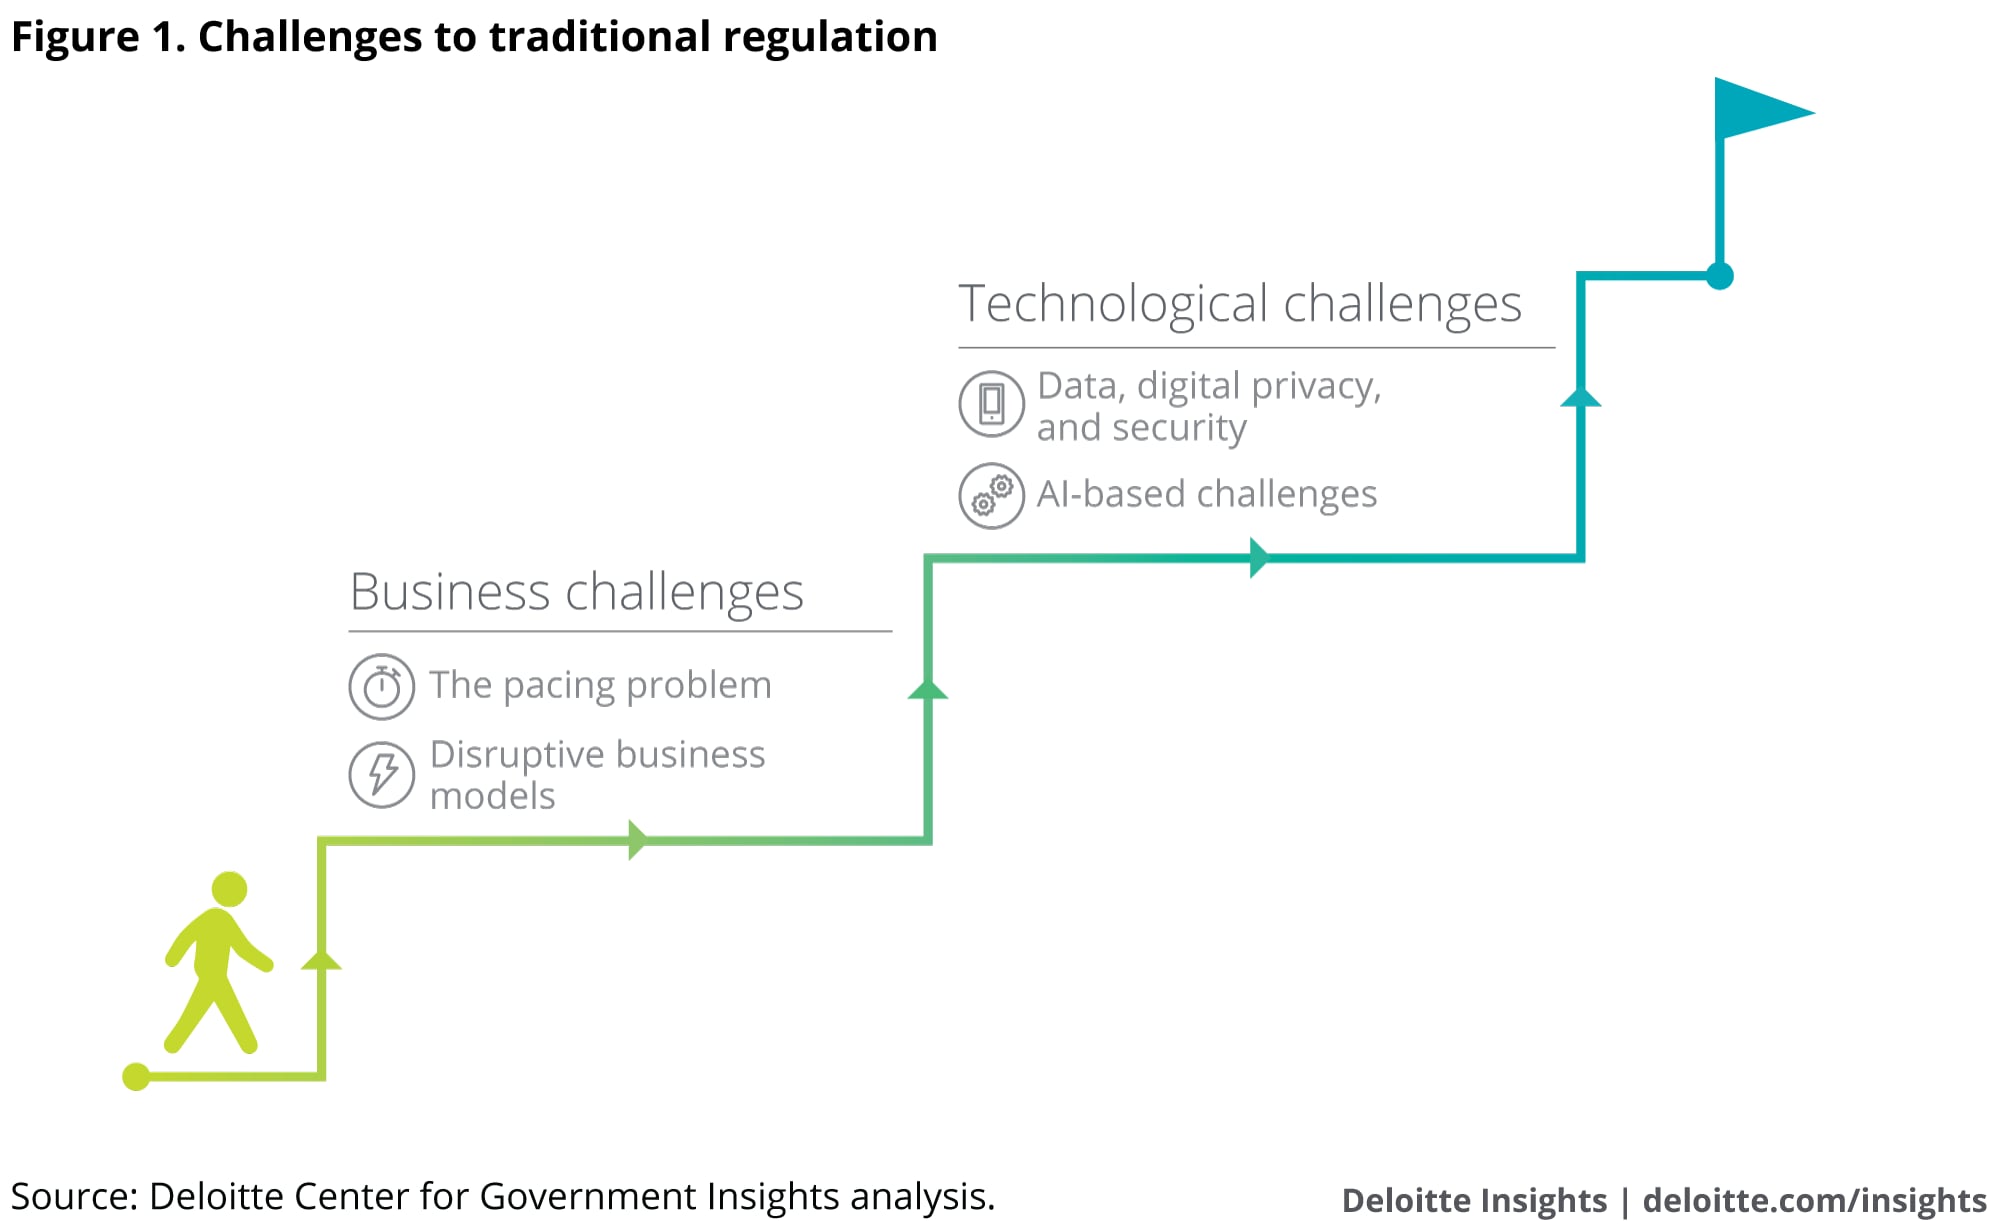 Challenges to traditional regulations